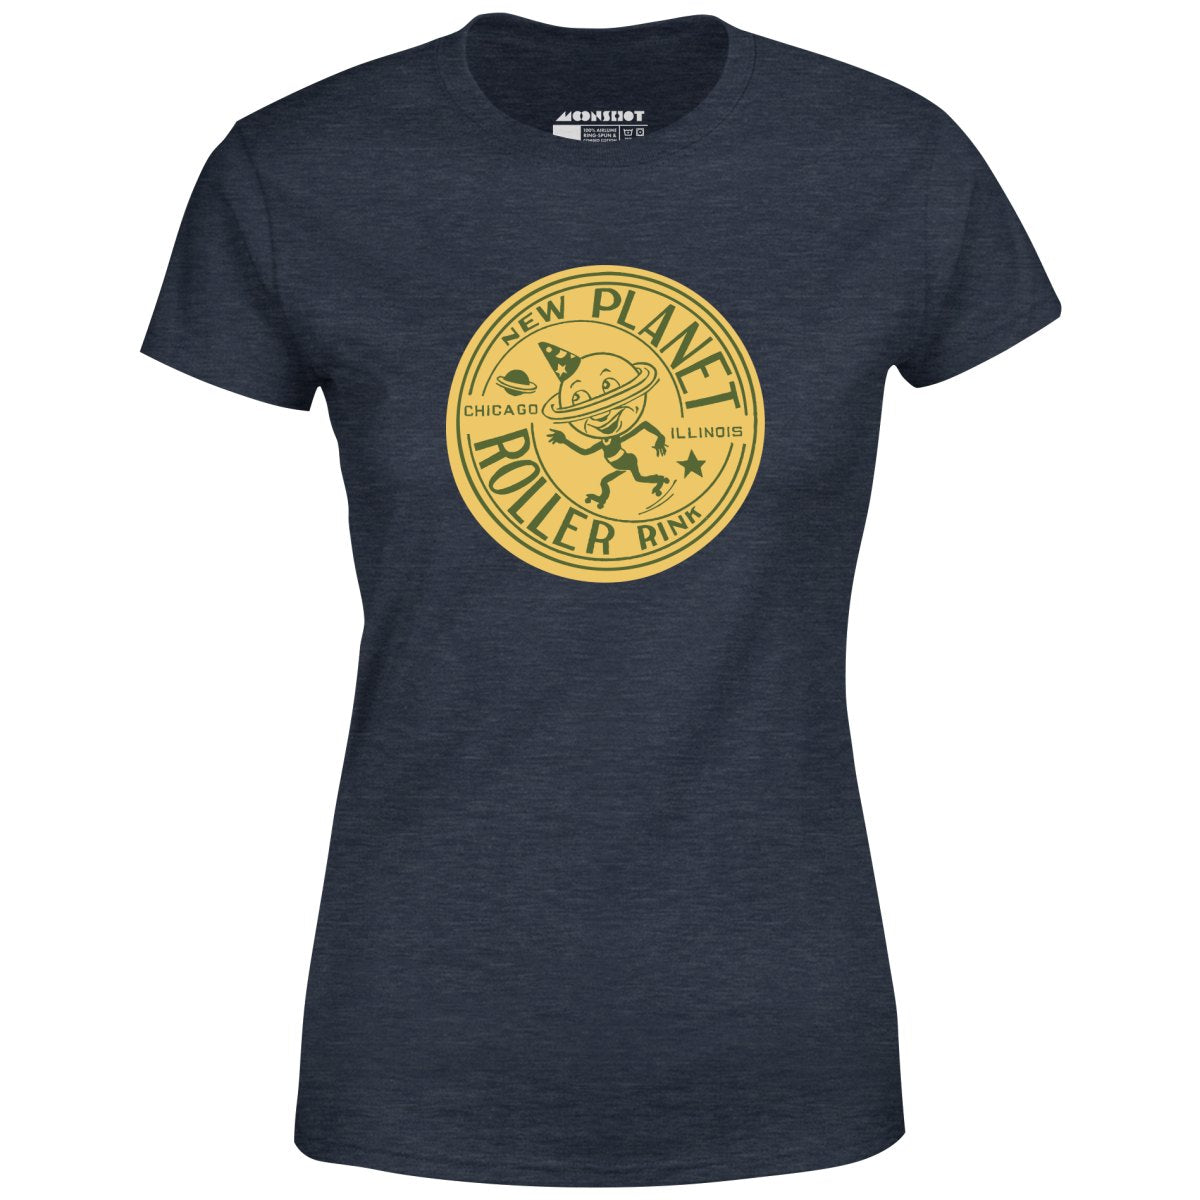 New Planet - Chicago, IL - Vintage Roller Rink - Women's T-Shirt